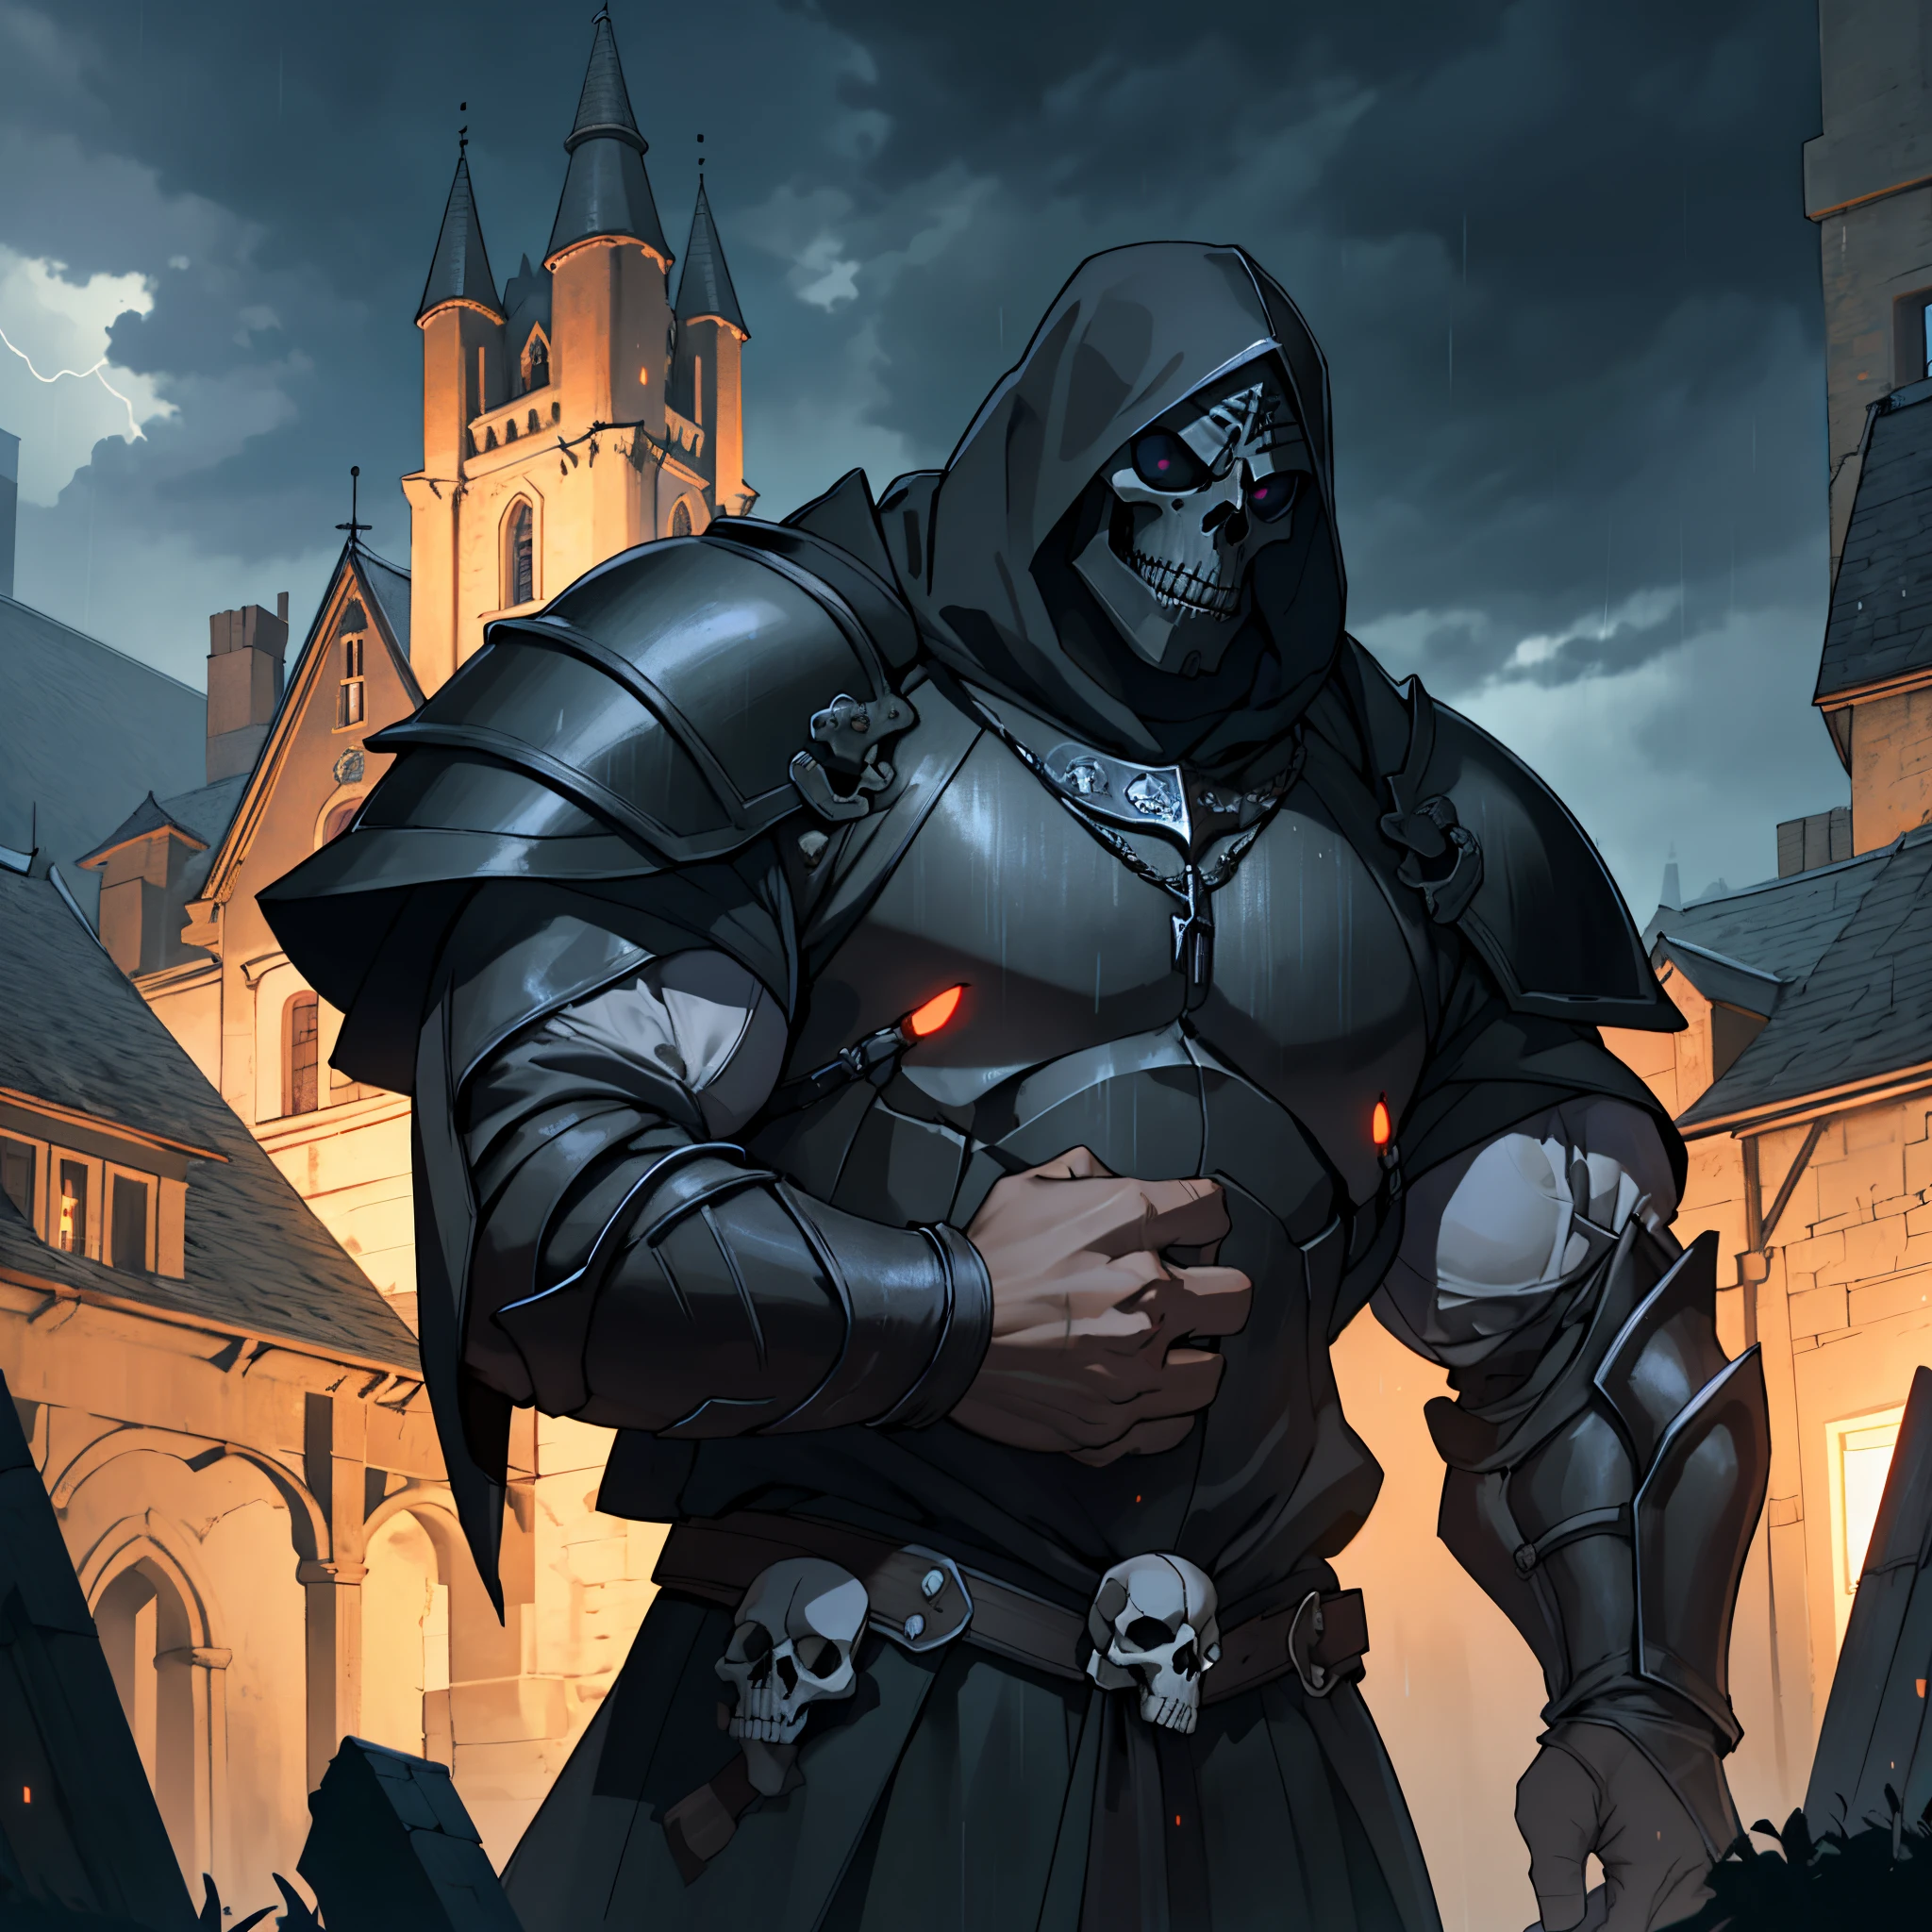 ​masterpiece, Best Quality, person upper body, detailed, 4k, Cinematics, Background with: Inside the illuminated medieval village in front of the medieval castle on a rainy night, dark clouds, thunderstorm, Very tall black knight wearing black steel armor and skull mask.